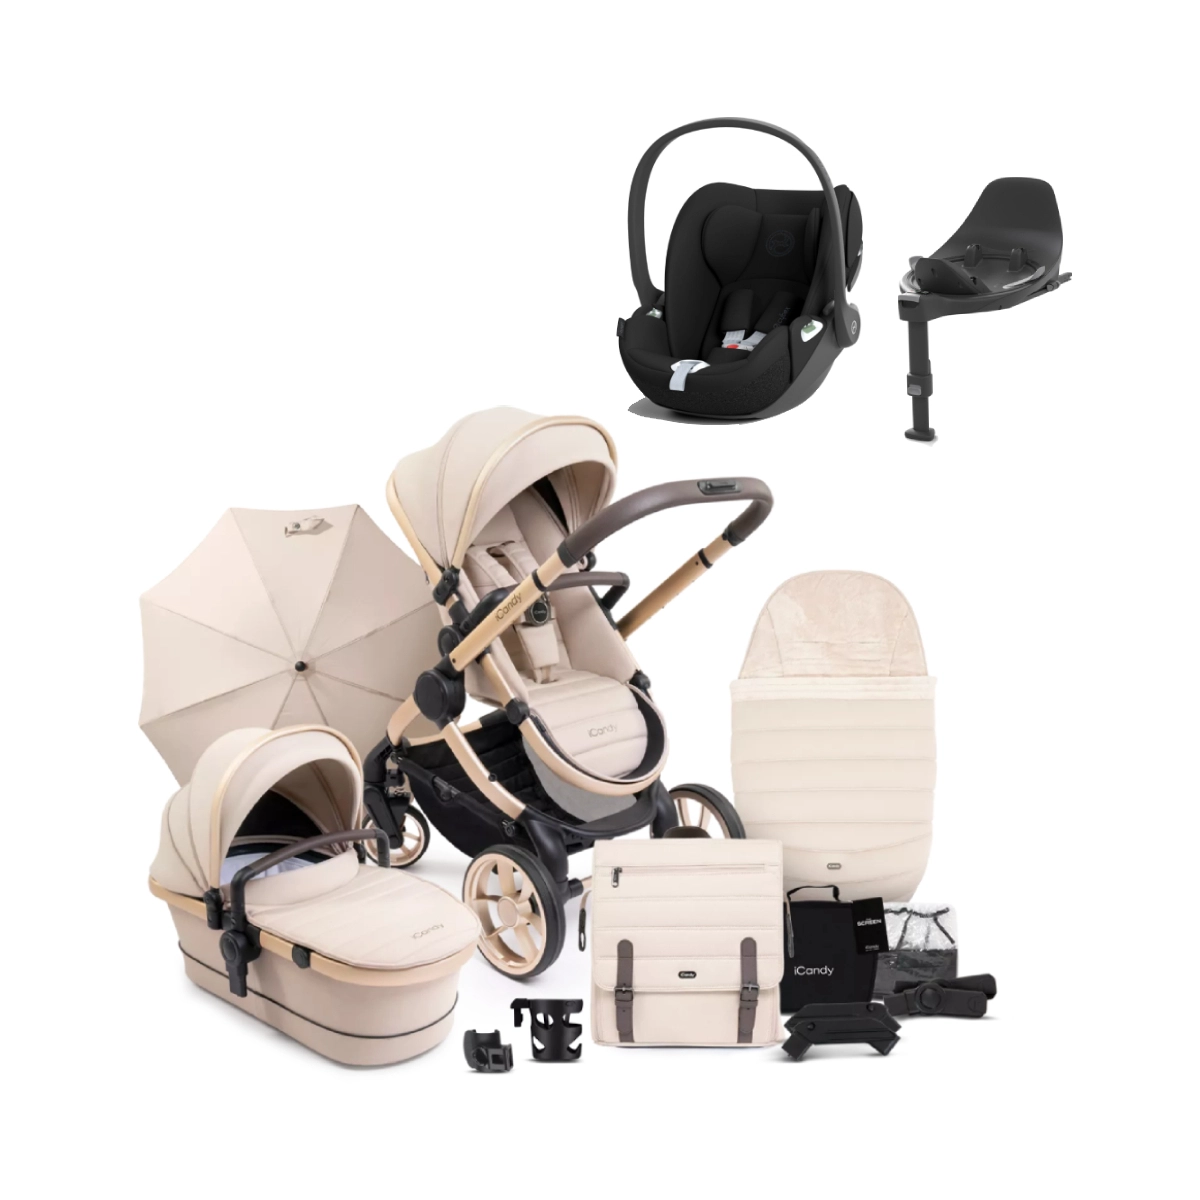 iCandy Peach 7 Bundle with Cybex Cloud T i-Size Car Seat & Base T